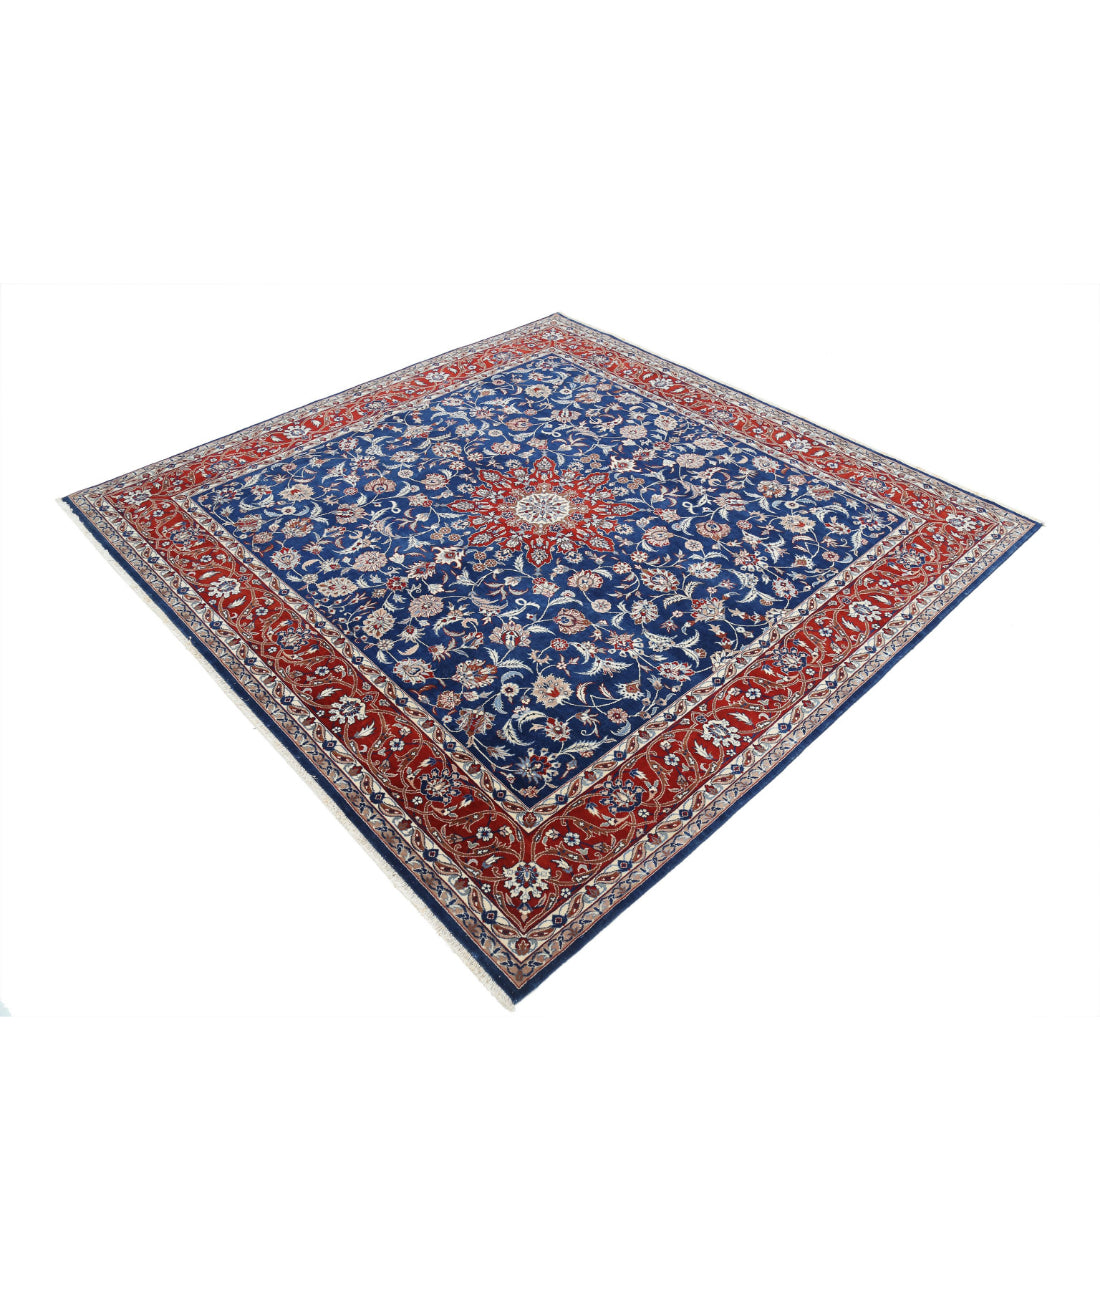 Heritage 6'6'' X 6'8'' Hand-Knotted Wool Rug 6'6'' x 6'8'' (195 X 200) / Blue / Red